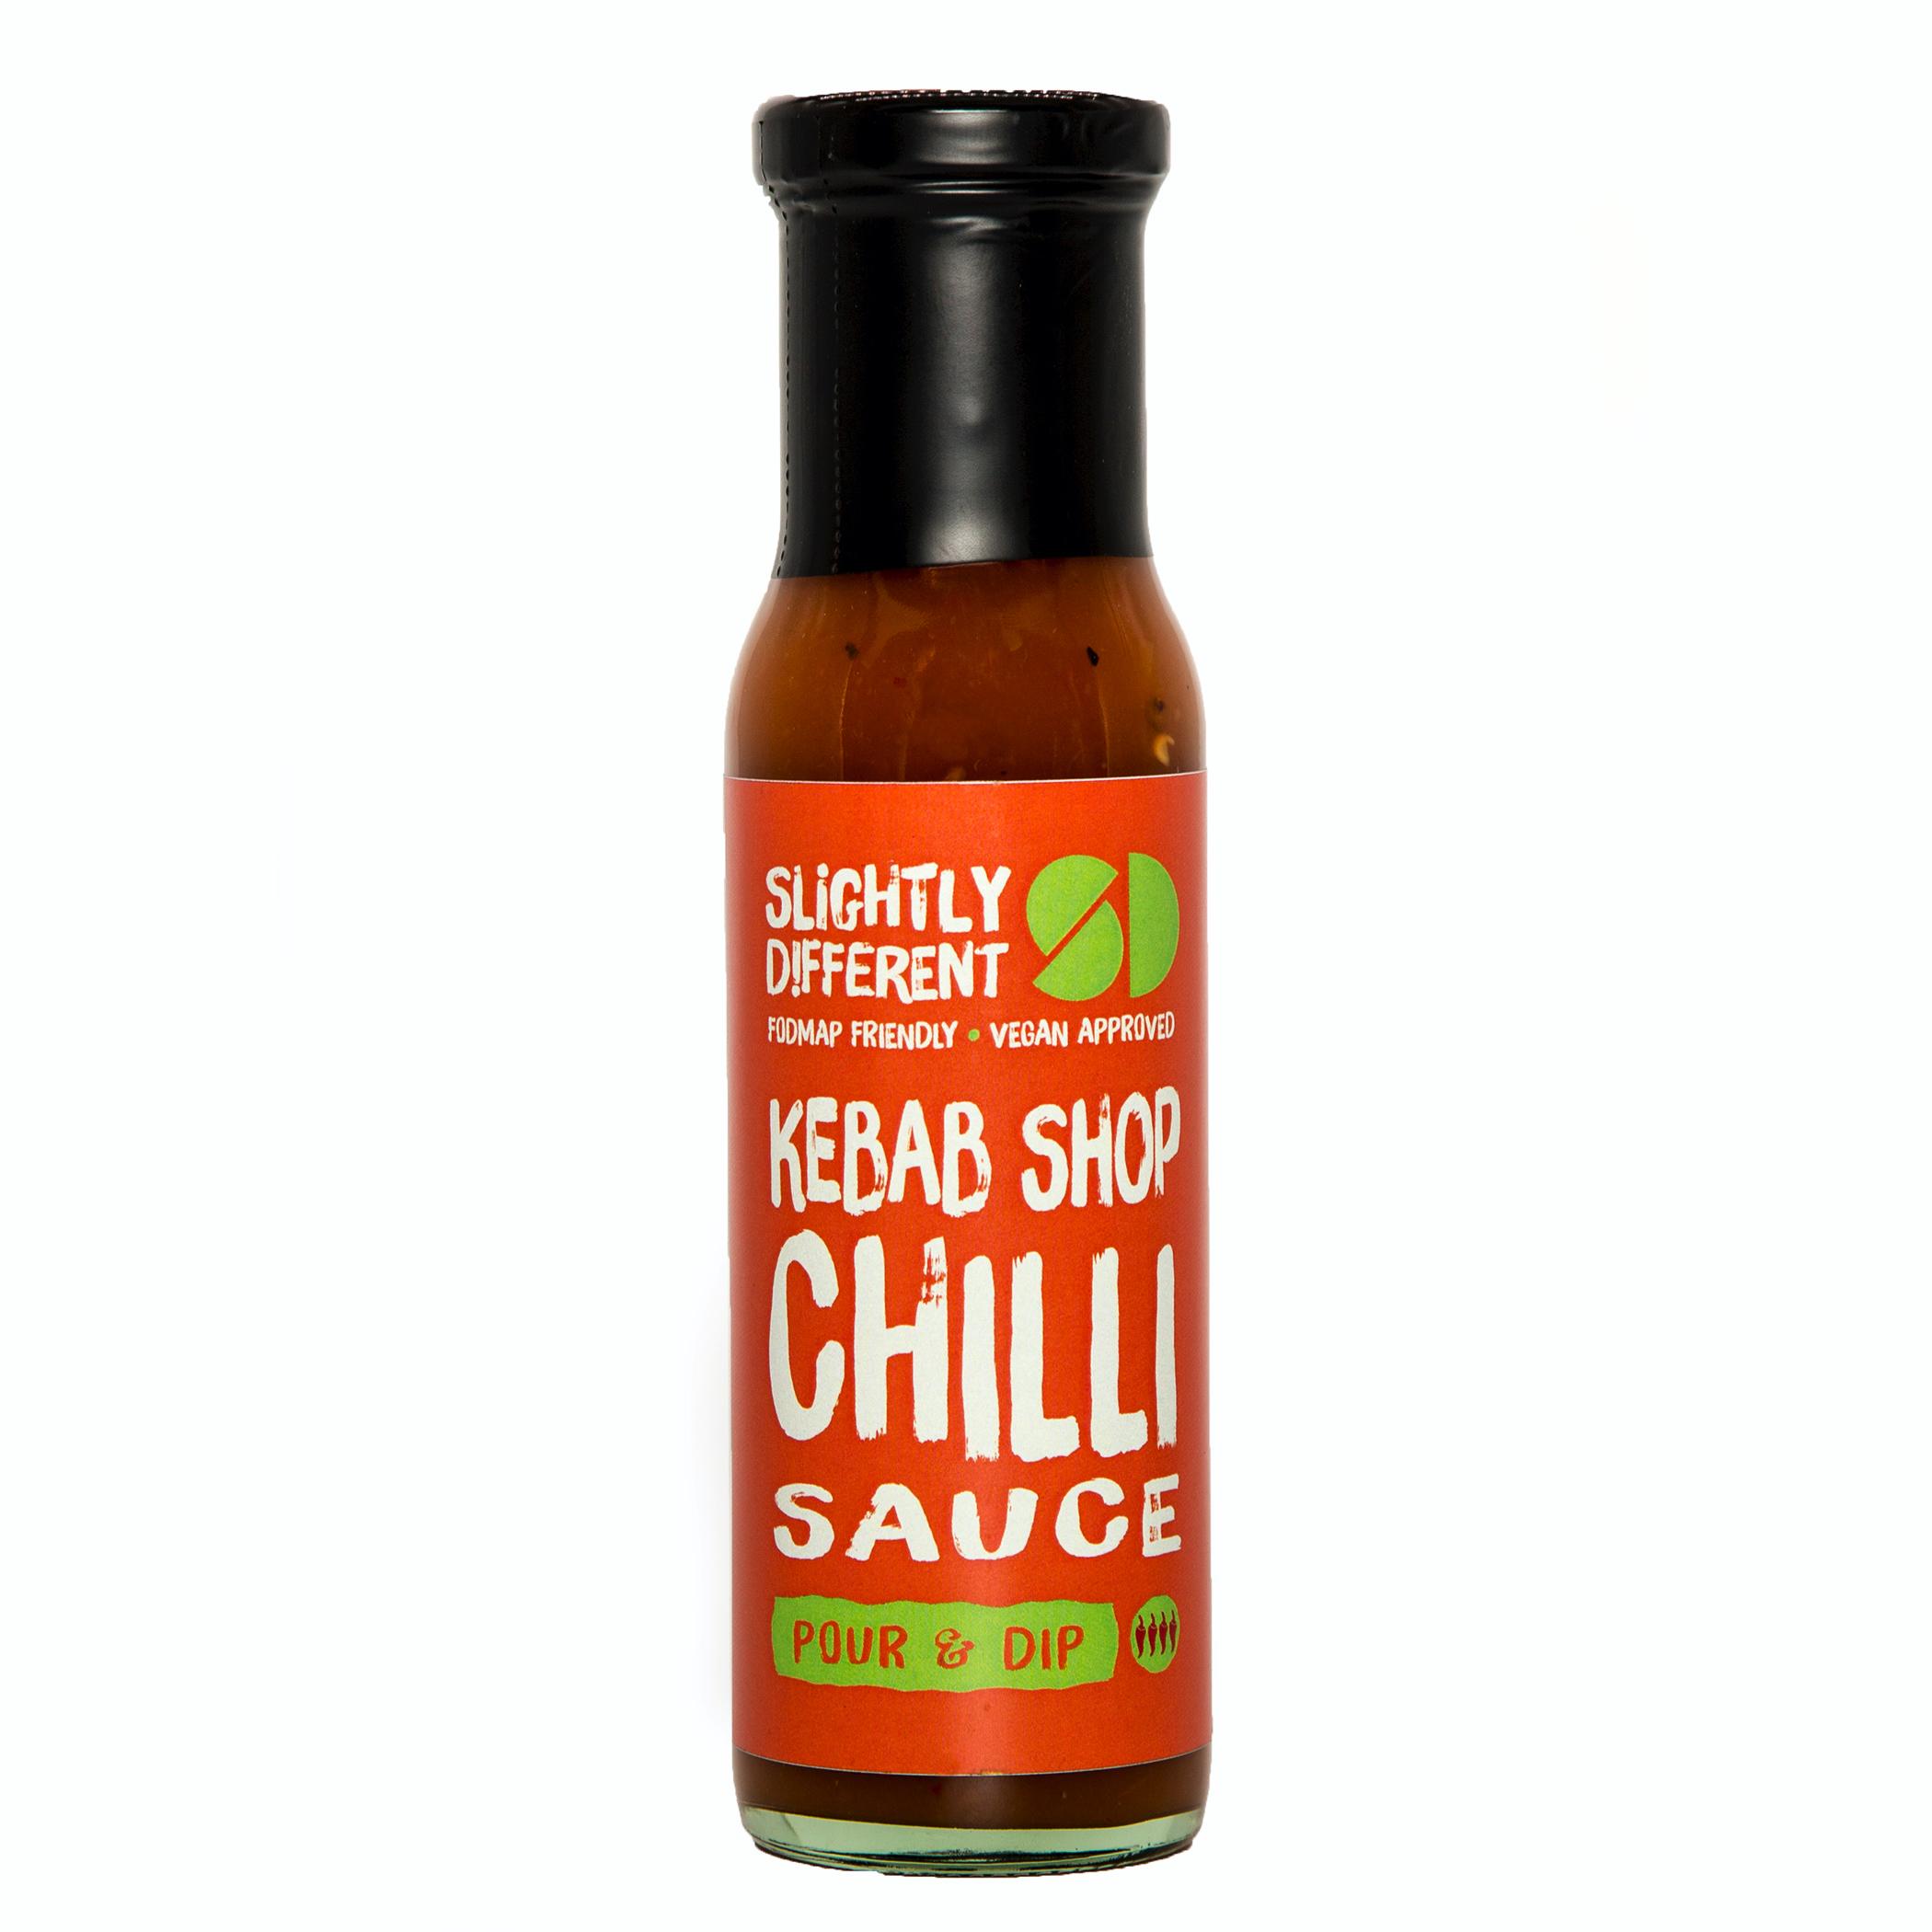 A bottle of Slightly Different's Kebab Shop Chilli Sauce